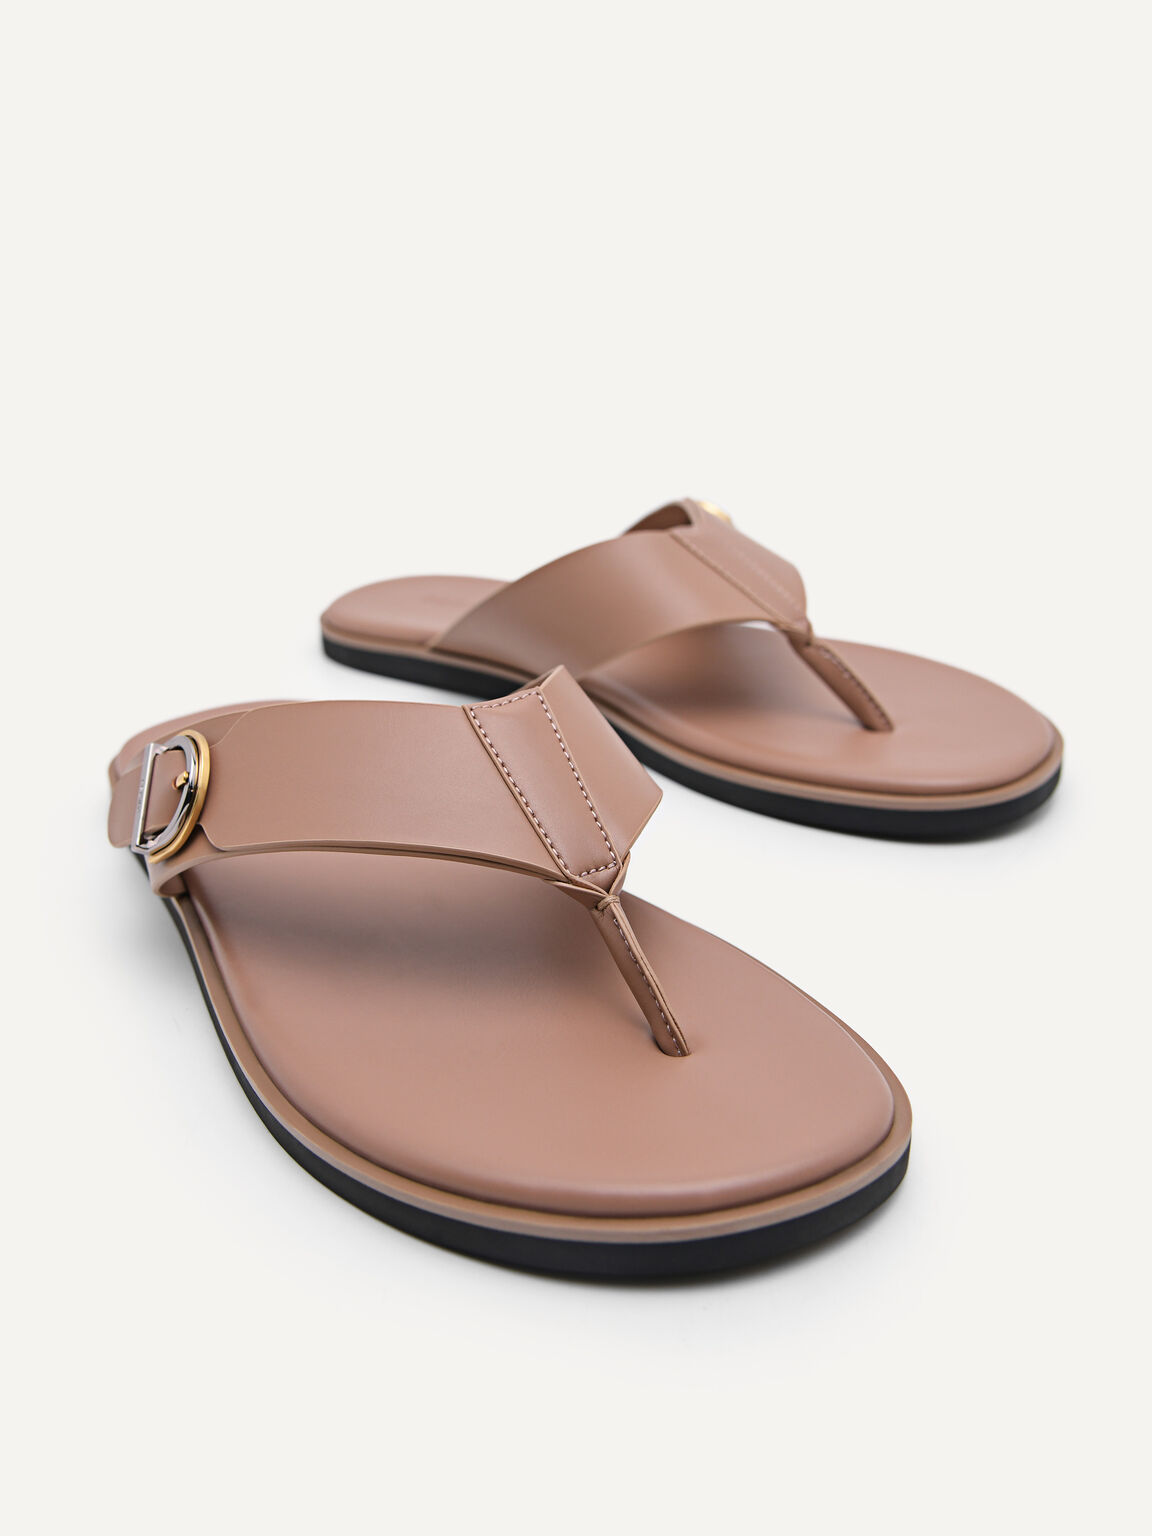 Thong Sandals, Taupe